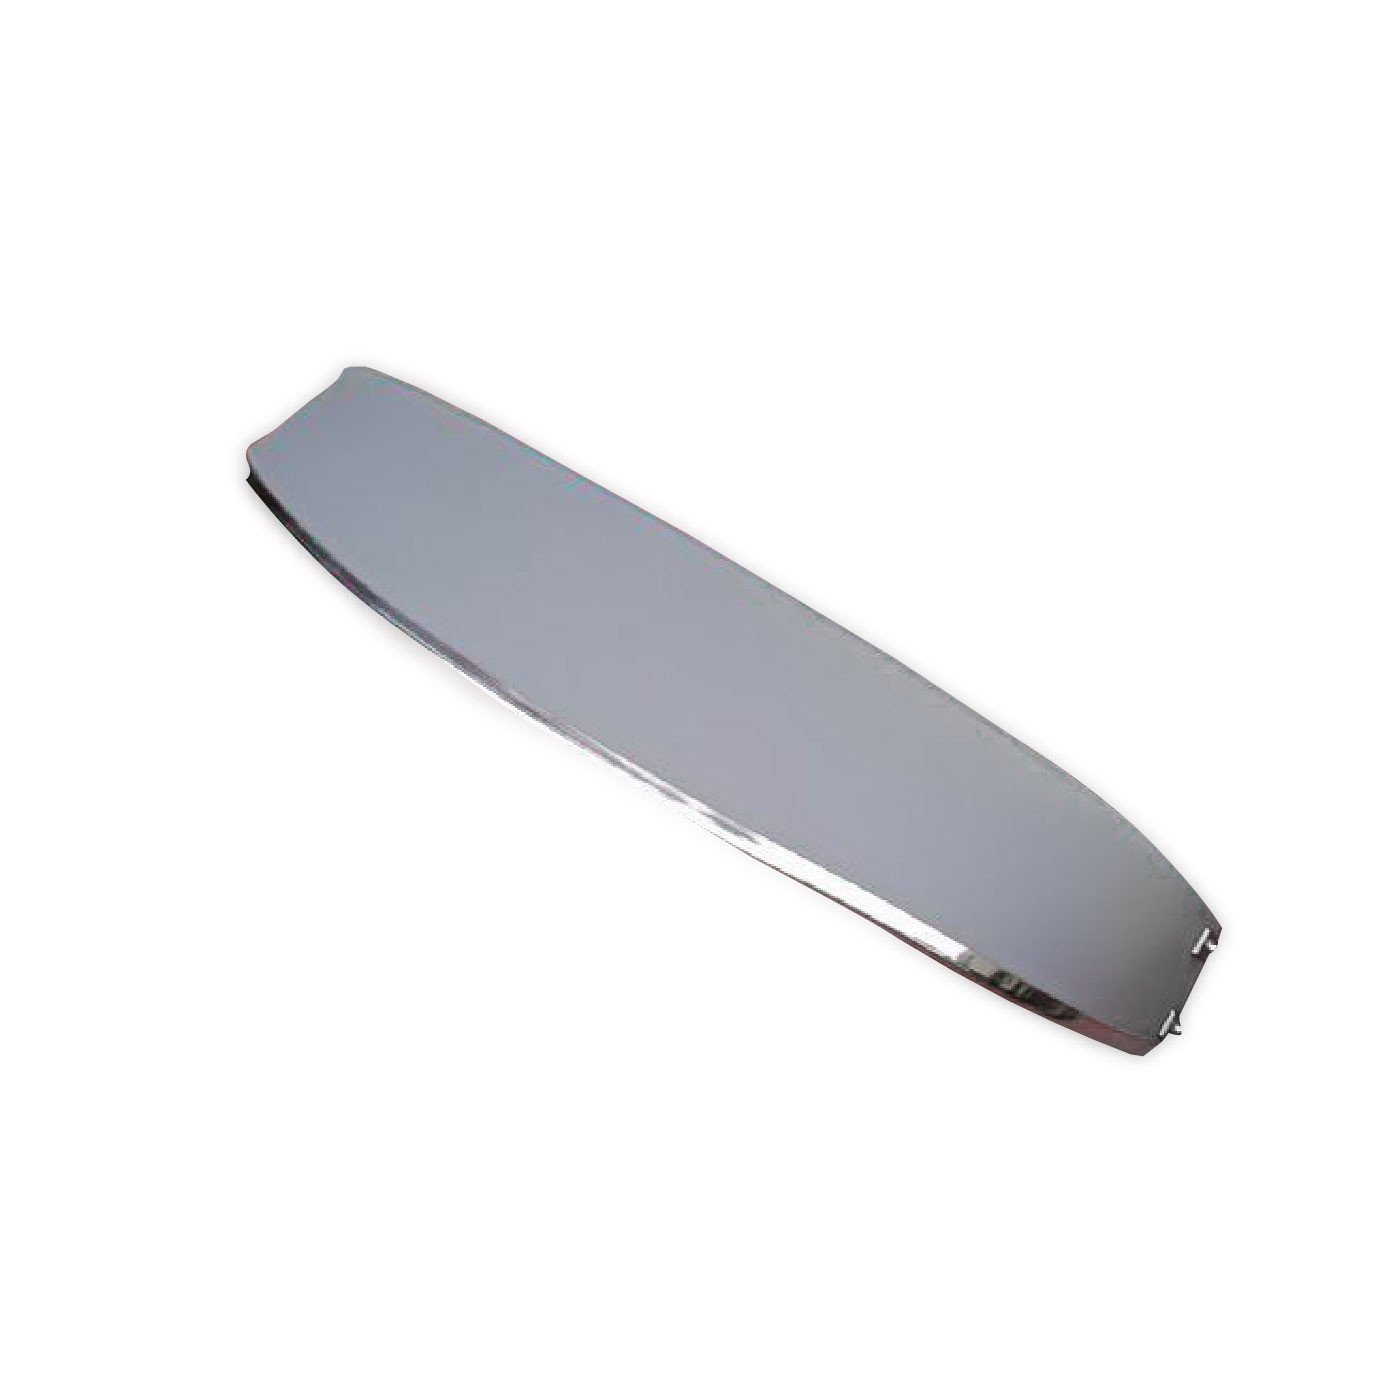 SOLID METAL SUNVISOR FOR JEEP RENEGADE 1975-1981